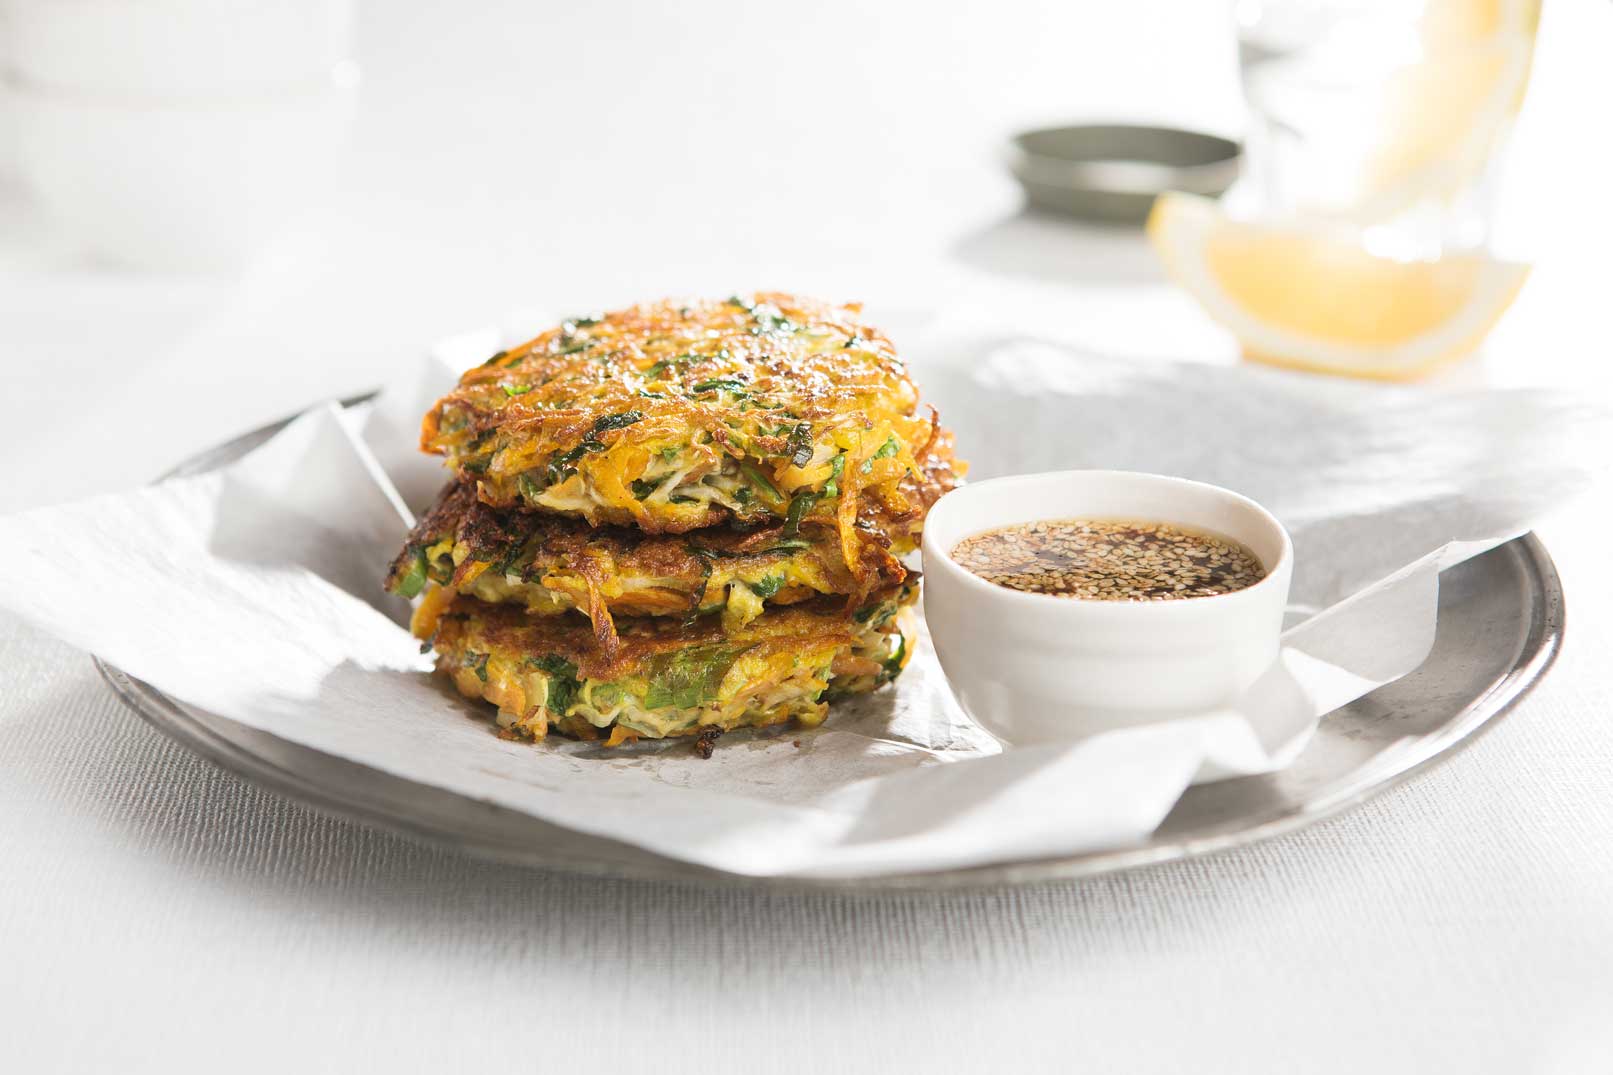 Image of three stacked vegetable pancakes on baking paper on a silver plate with a side of dipping sauce and lemon wedge.